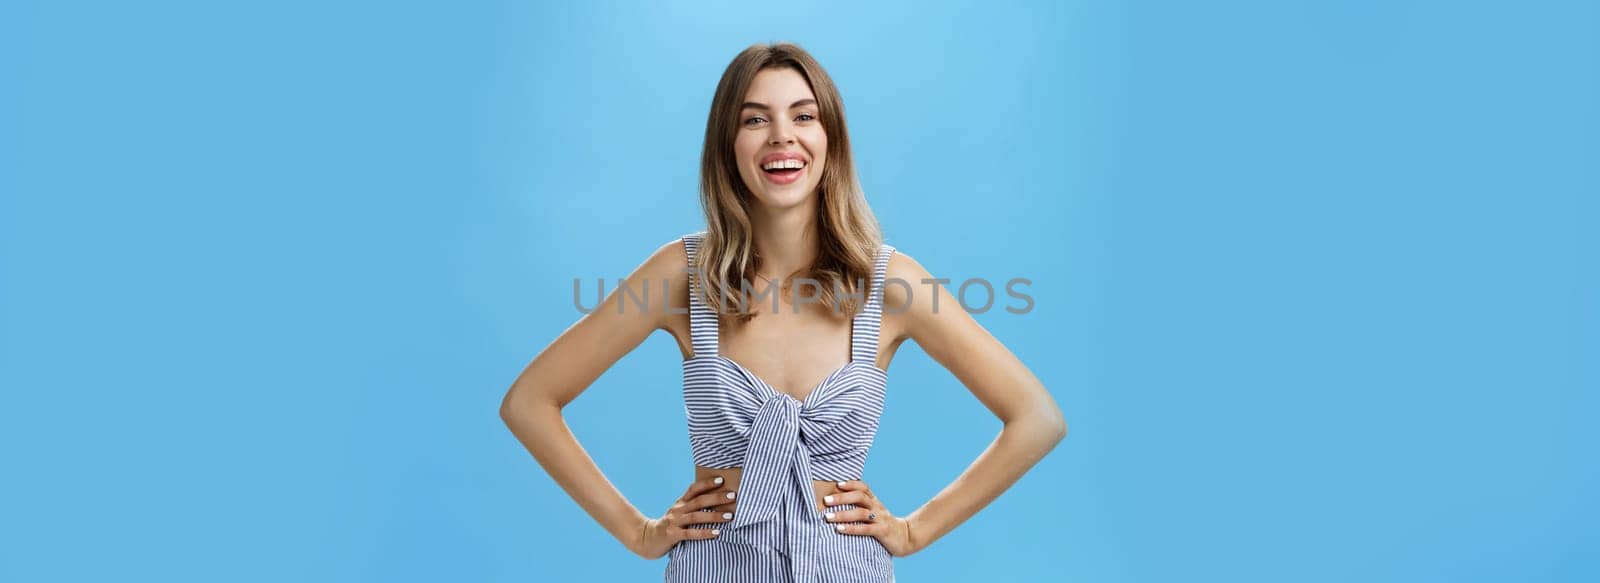 Amused and delighted cute adult female with chestnut hair in casual clothes holding hands on hip laughing and smiling broadly feeling excited during conversation posing against blue background. Copy space